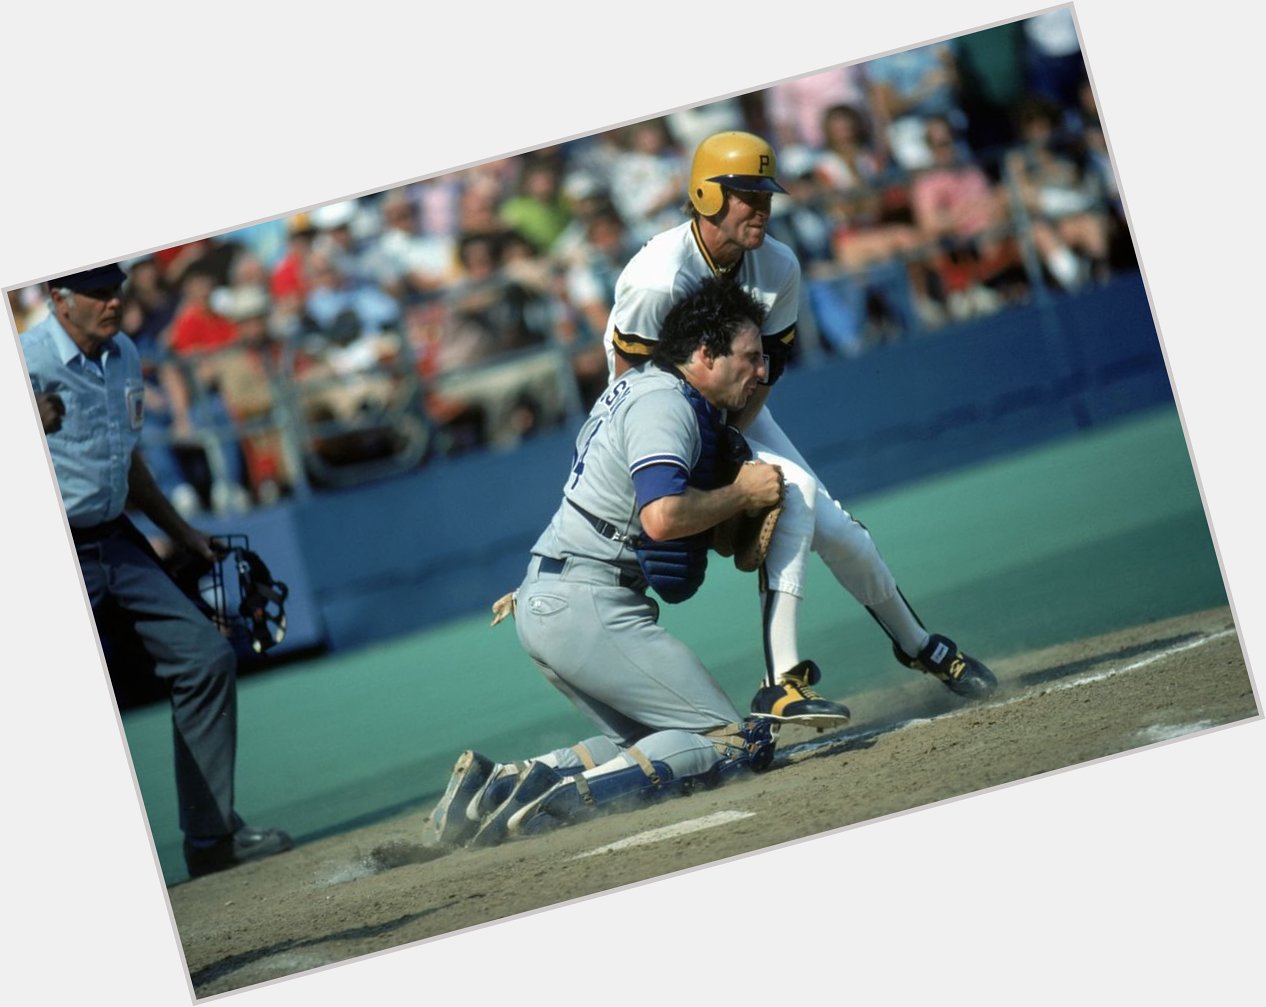 Happy \80s Birthday to Mike Scioscia, who turns 59 today and was as tough as they came behind the plate. 